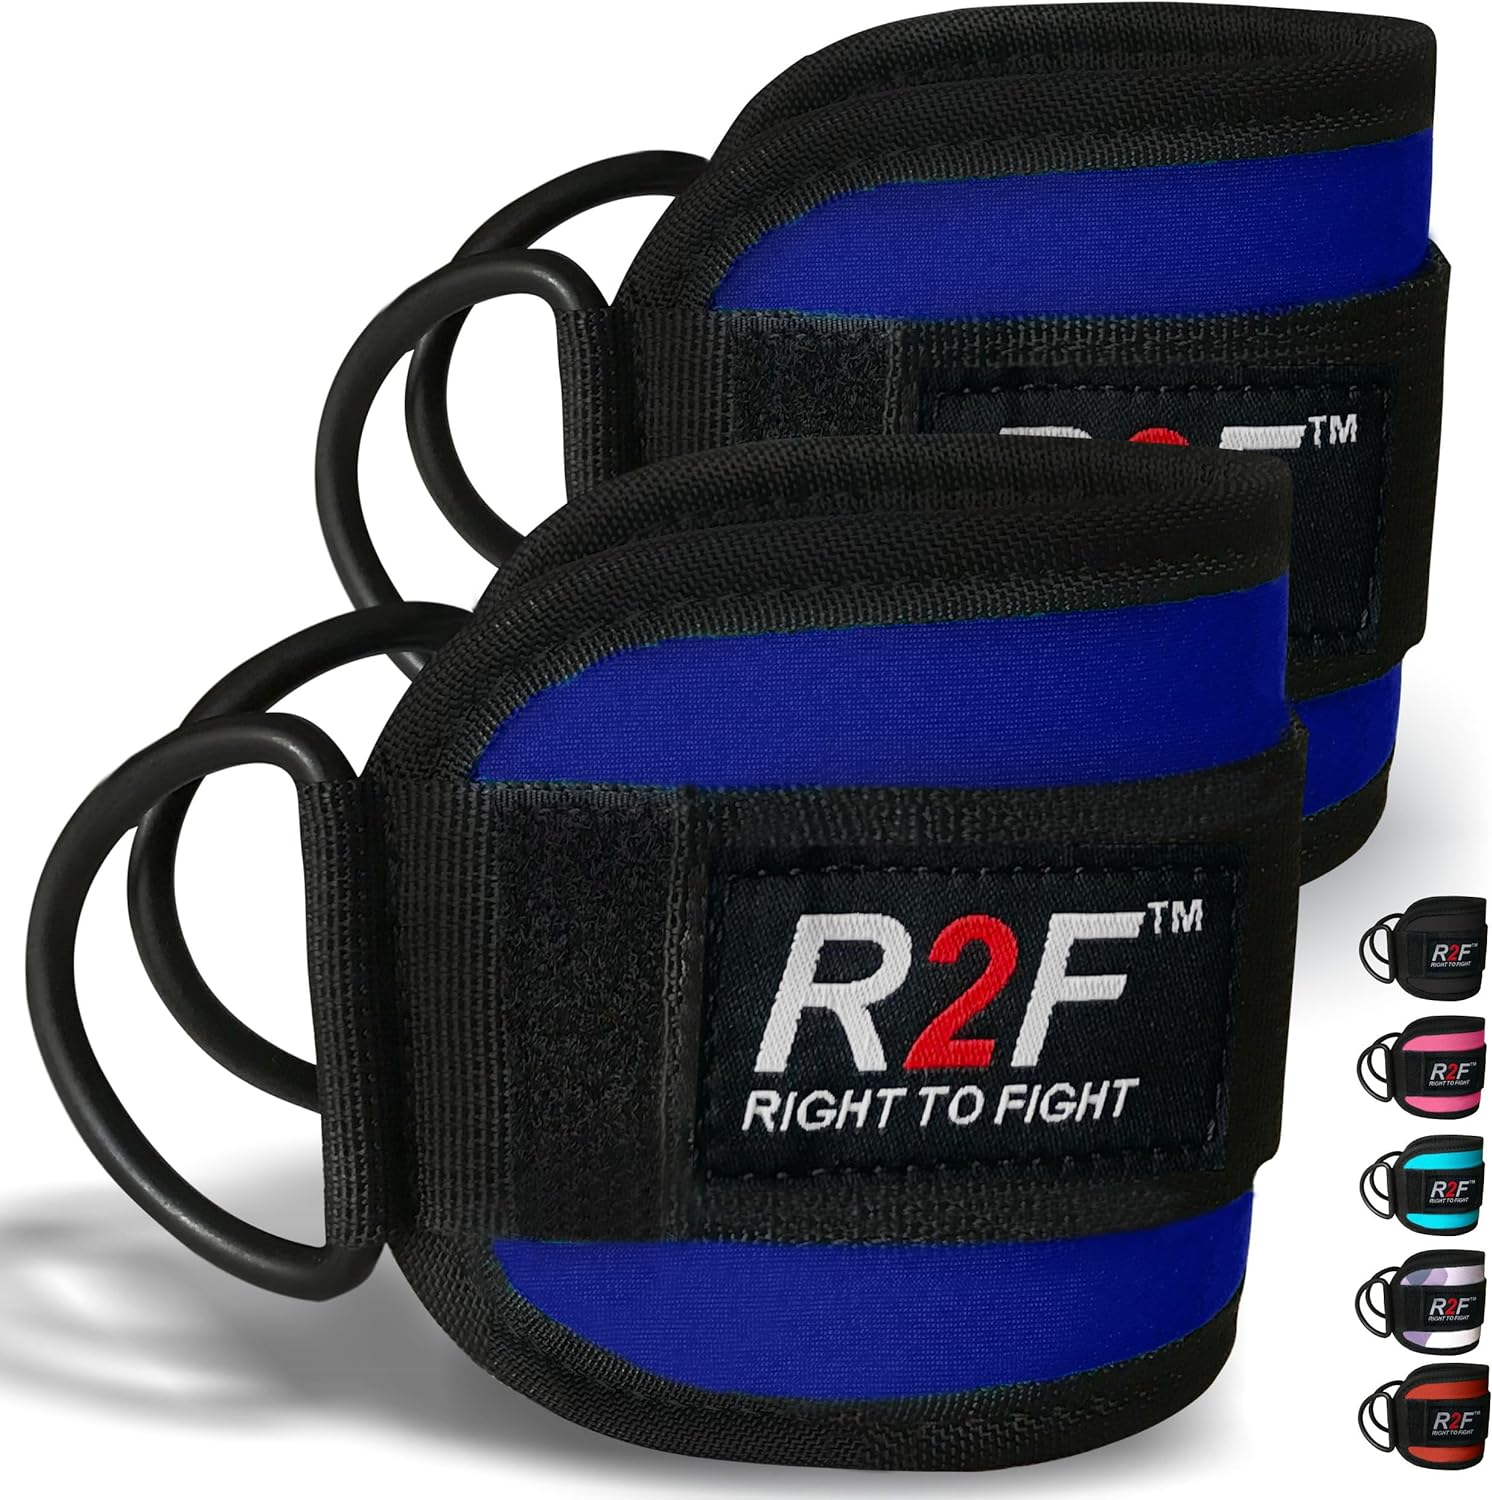 R2F Ankle Straps For Best Workout Cable Machines Attachments Padded Gym Pair  Weighted Kickback Engaging Glutes, Hip Abductors, Core Muscles Ideal For Men/Women Multipurpose Use Gym Equipment Cable Leg Exercises.